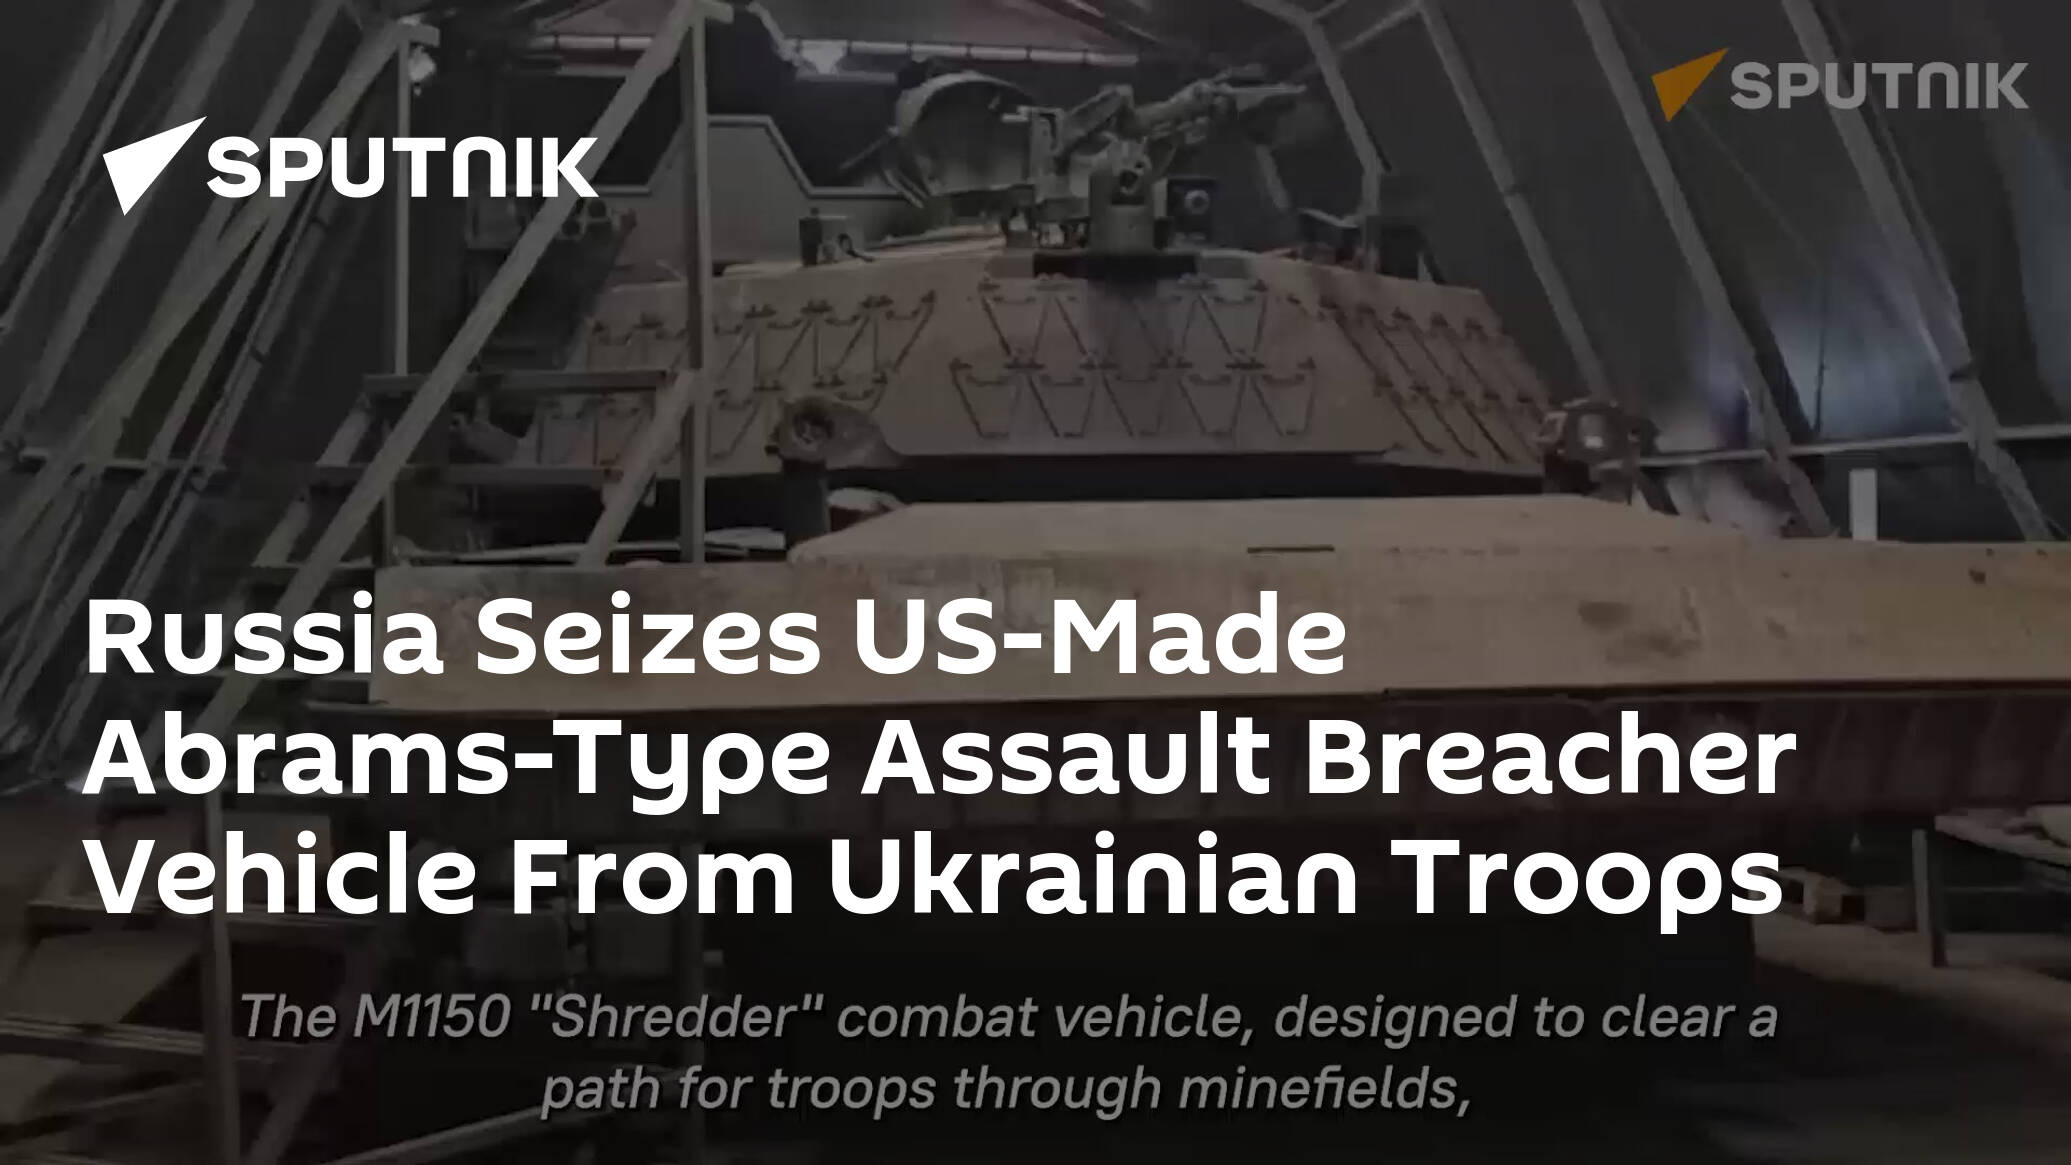 Russia Seizes US-Made Abrams-Type Assault Breacher Vehicle From Ukrainian Troops [Video]